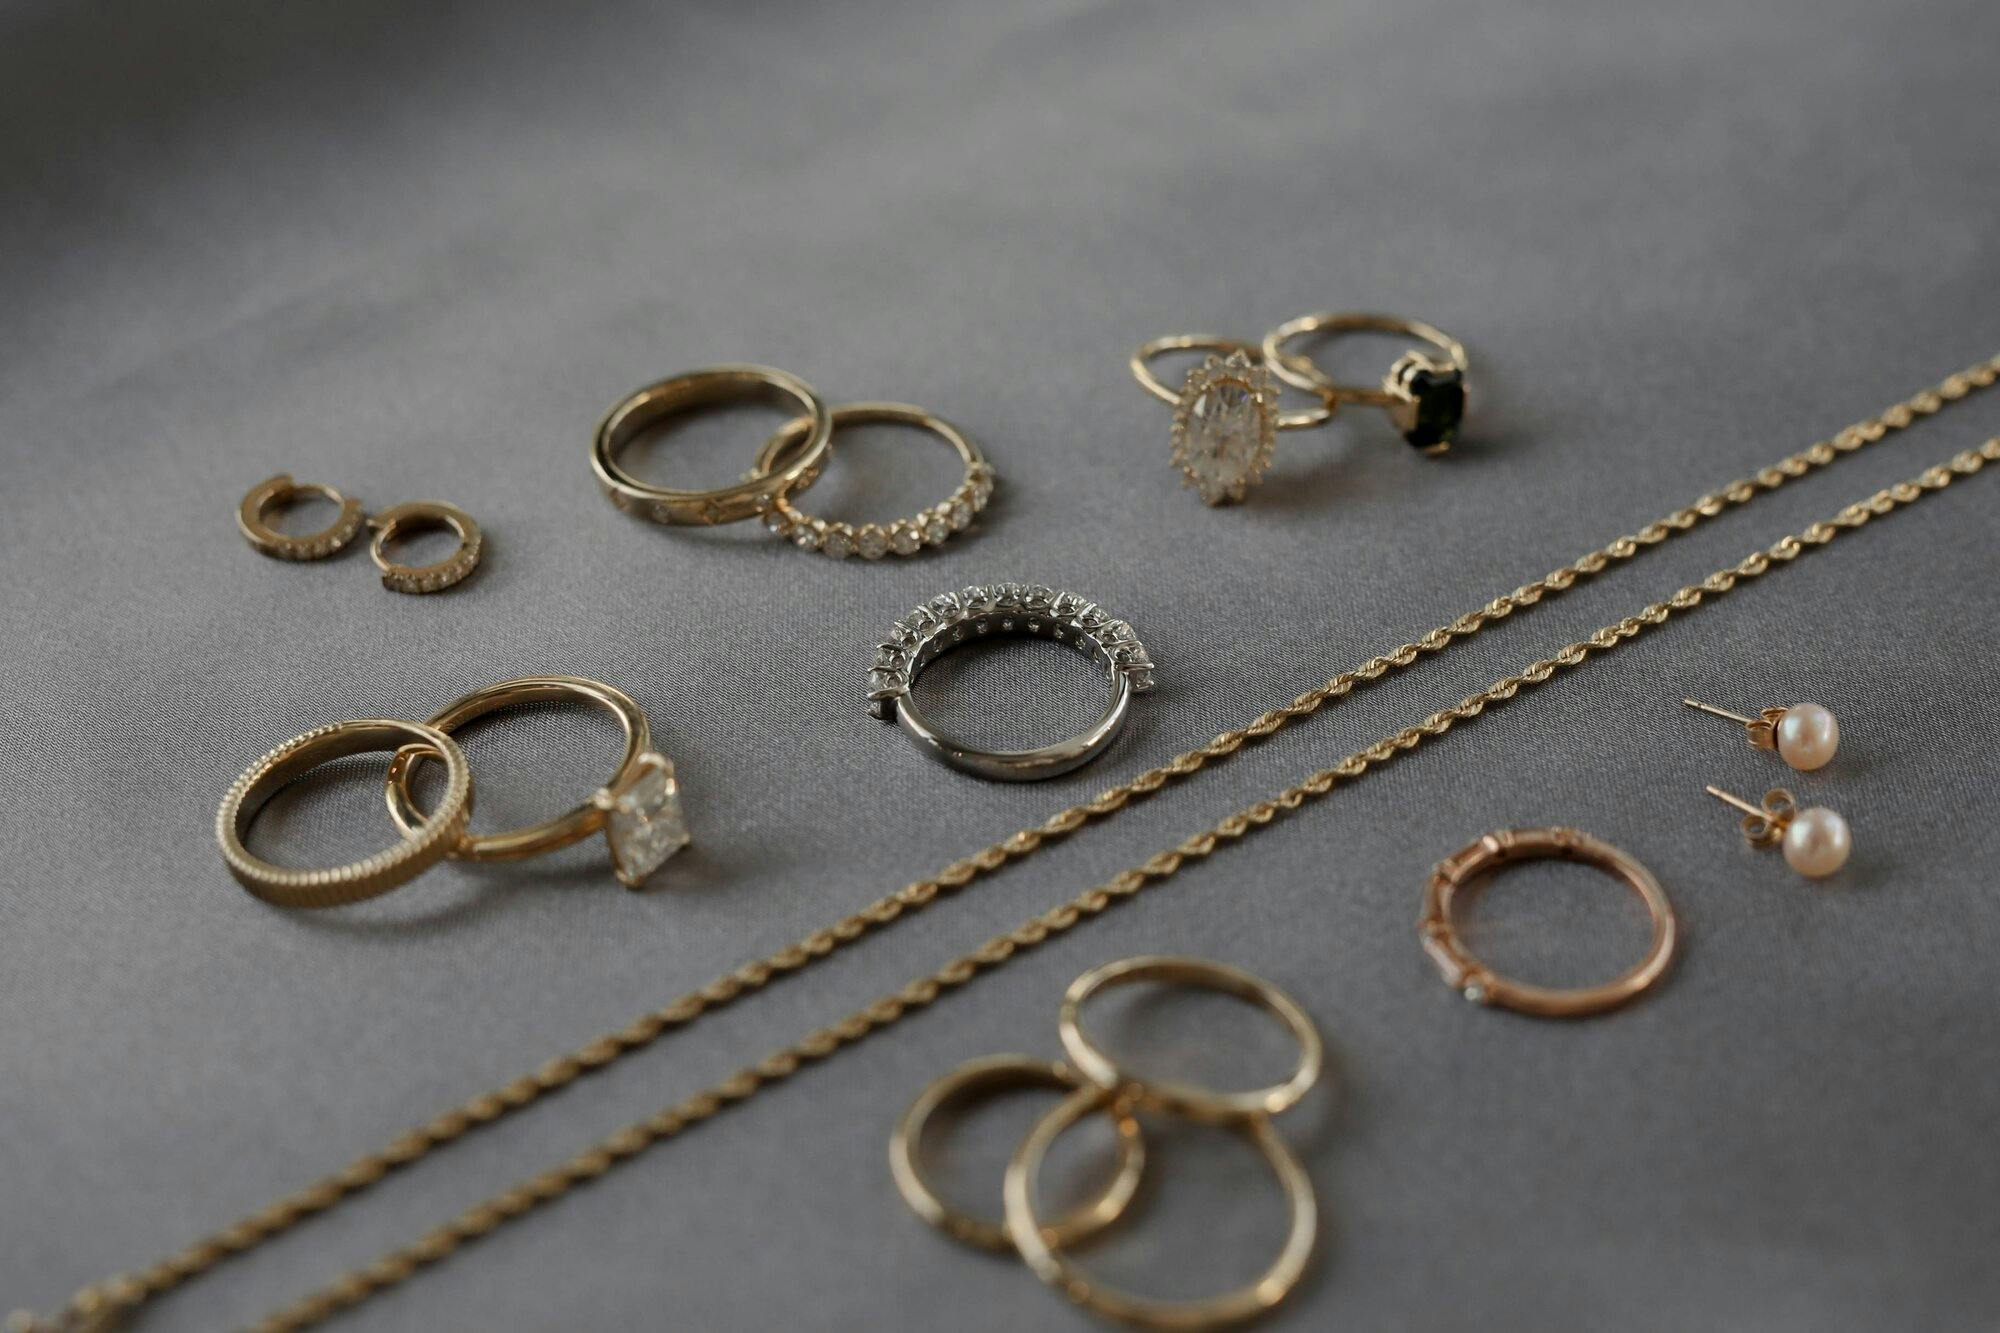 a group shot of different jewelry pieces on grey fabric